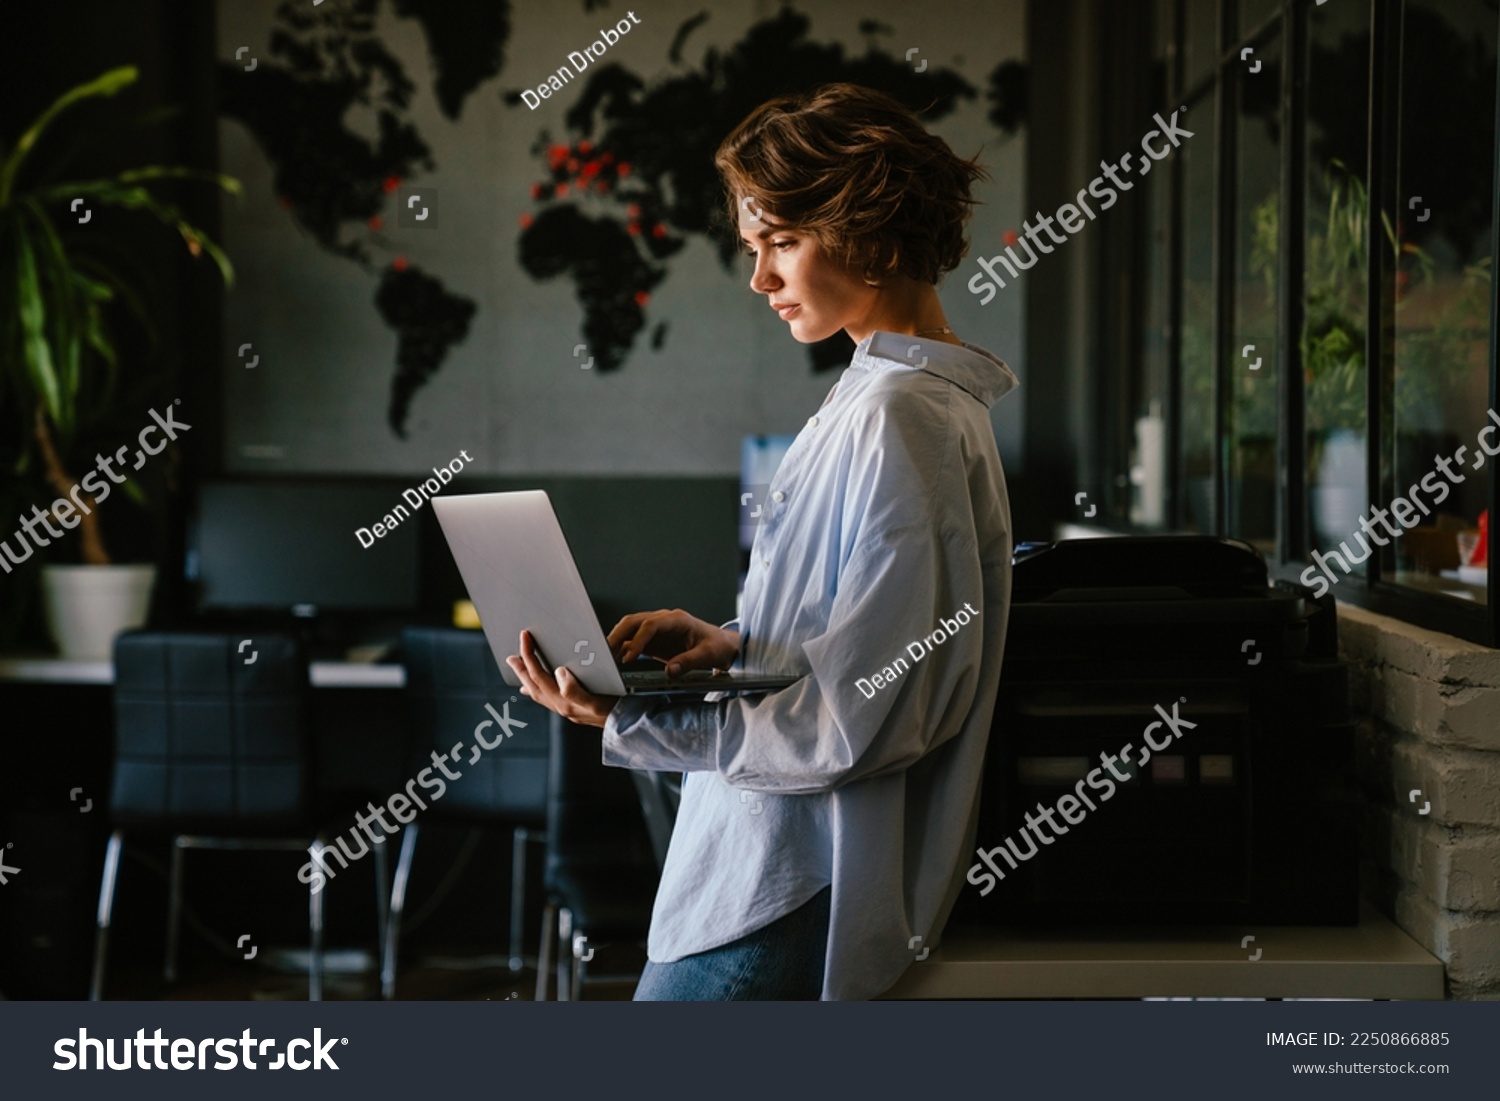 Beautiful young concentrated business woman wearing shirt using laptop while standing in modern workspace #2250866885